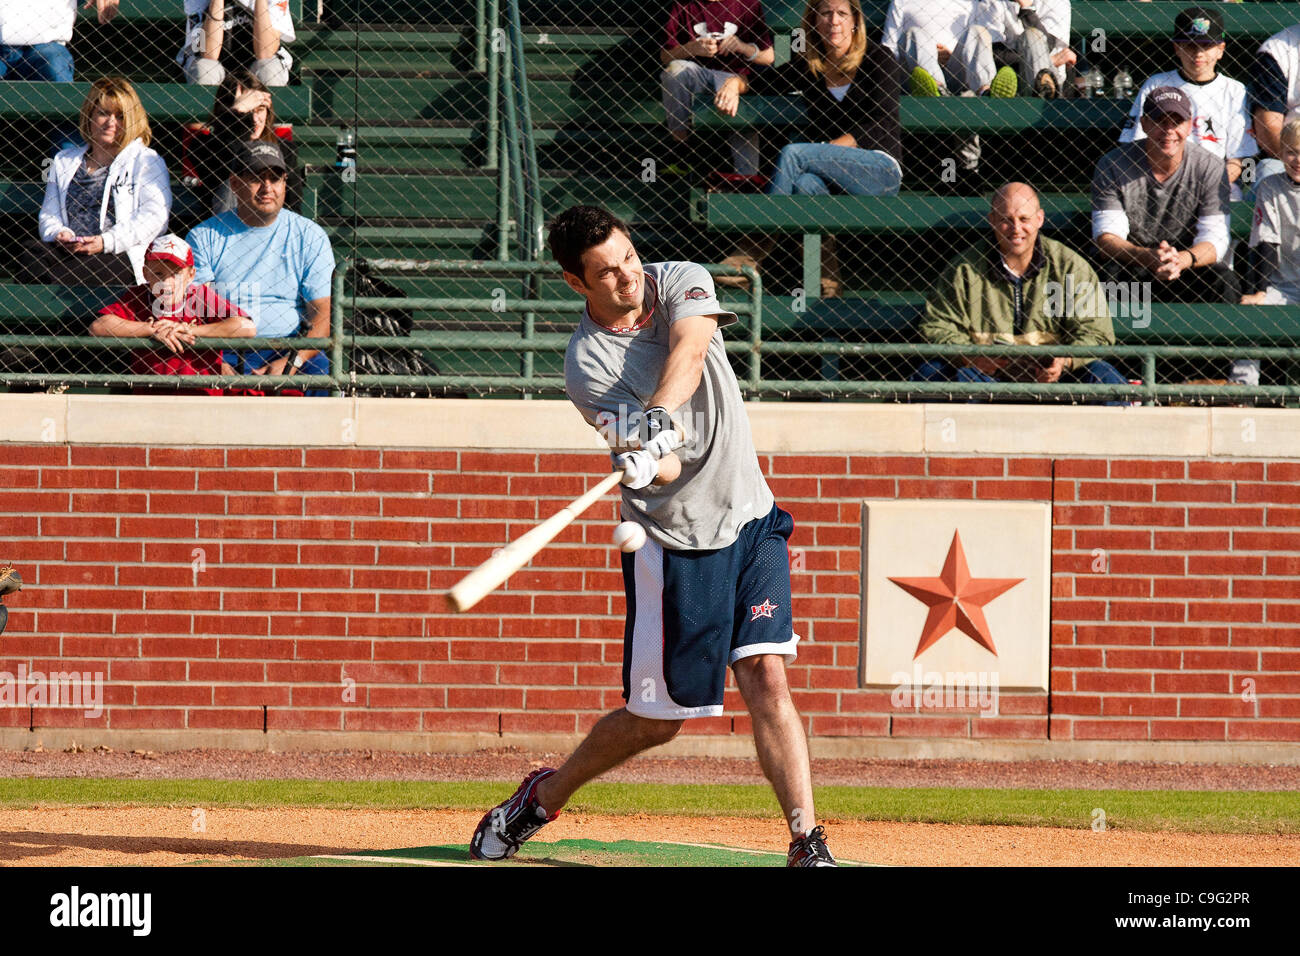 Dec. 18, 2011 - Houston, Texas, U.S - MLB Player Howie Pence participated in the home-run derby during the 3rd Annual Hunter Pence Baseball Camp at Baseball USA in Houston, TX. (Credit Image: © Juan DeLeon/Southcreek/ZUMAPRESS.com) Stock Photo